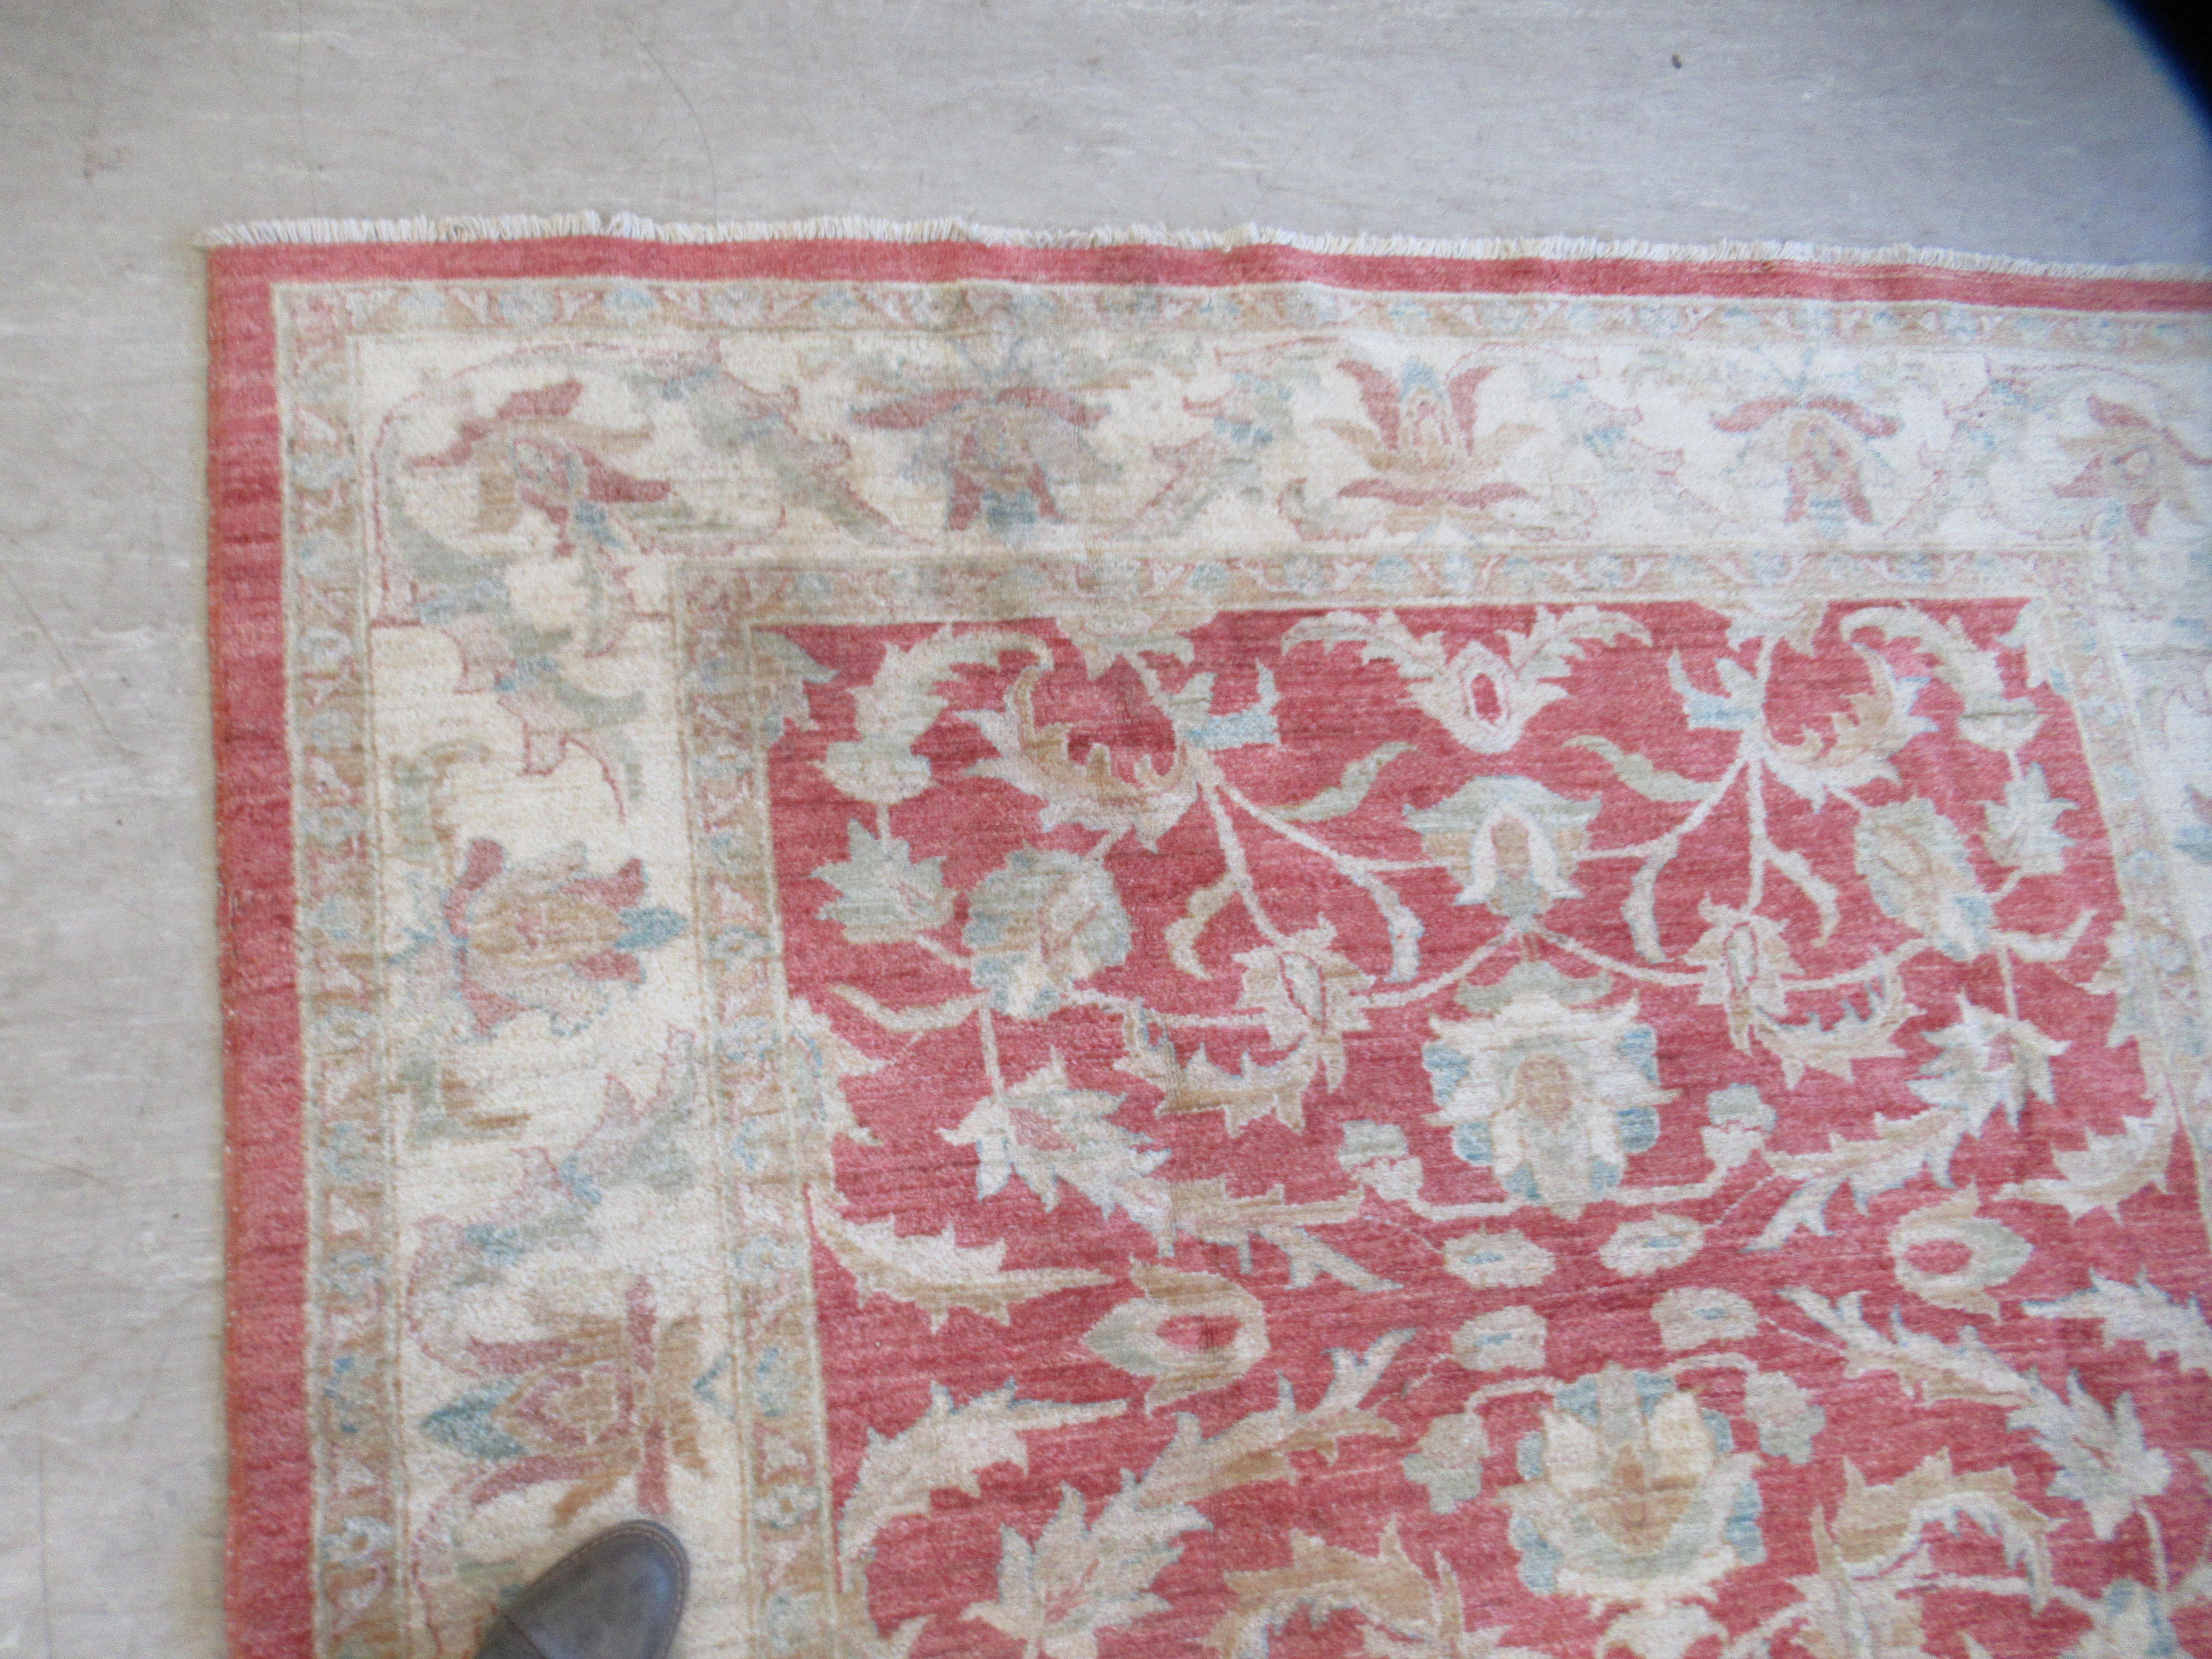 A Ziegler rug, decorated with foliate designs, on a red and cream coloured ground  79" x 78" - Image 2 of 6